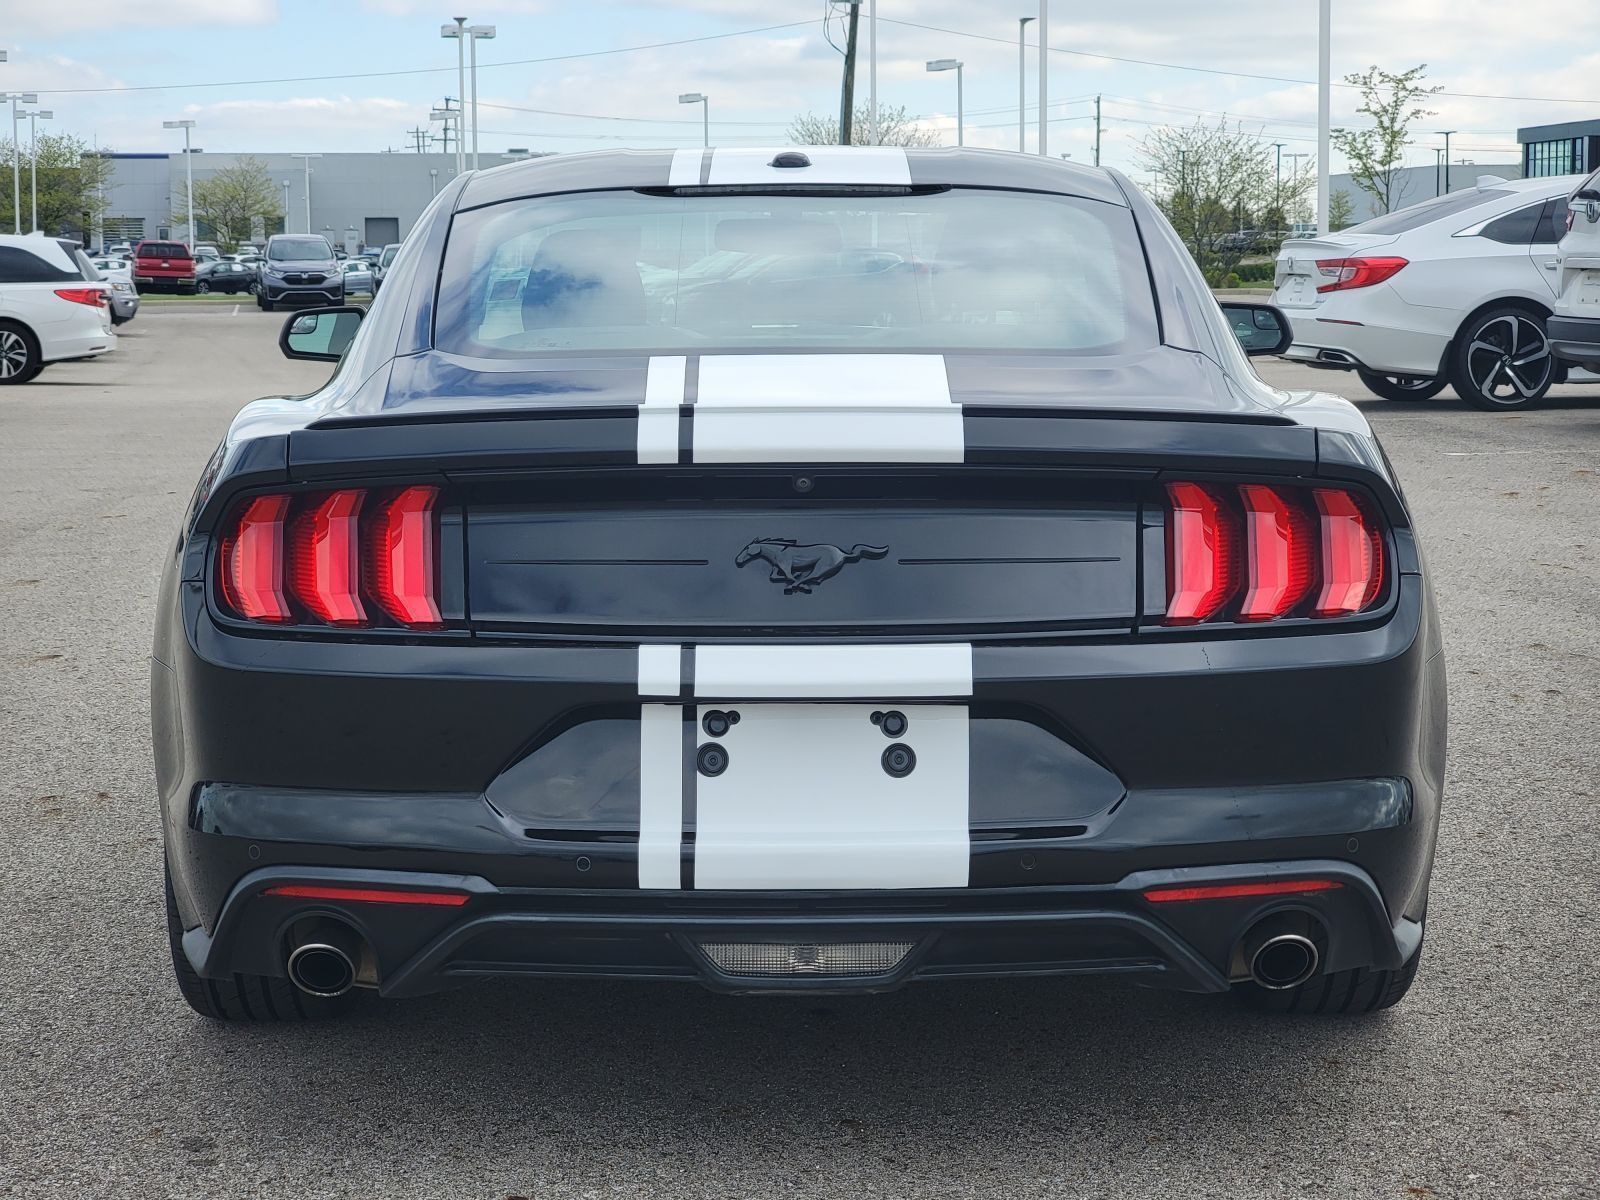 Used, 2019 Ford Mustang EcoBoost, Black, P0537-13